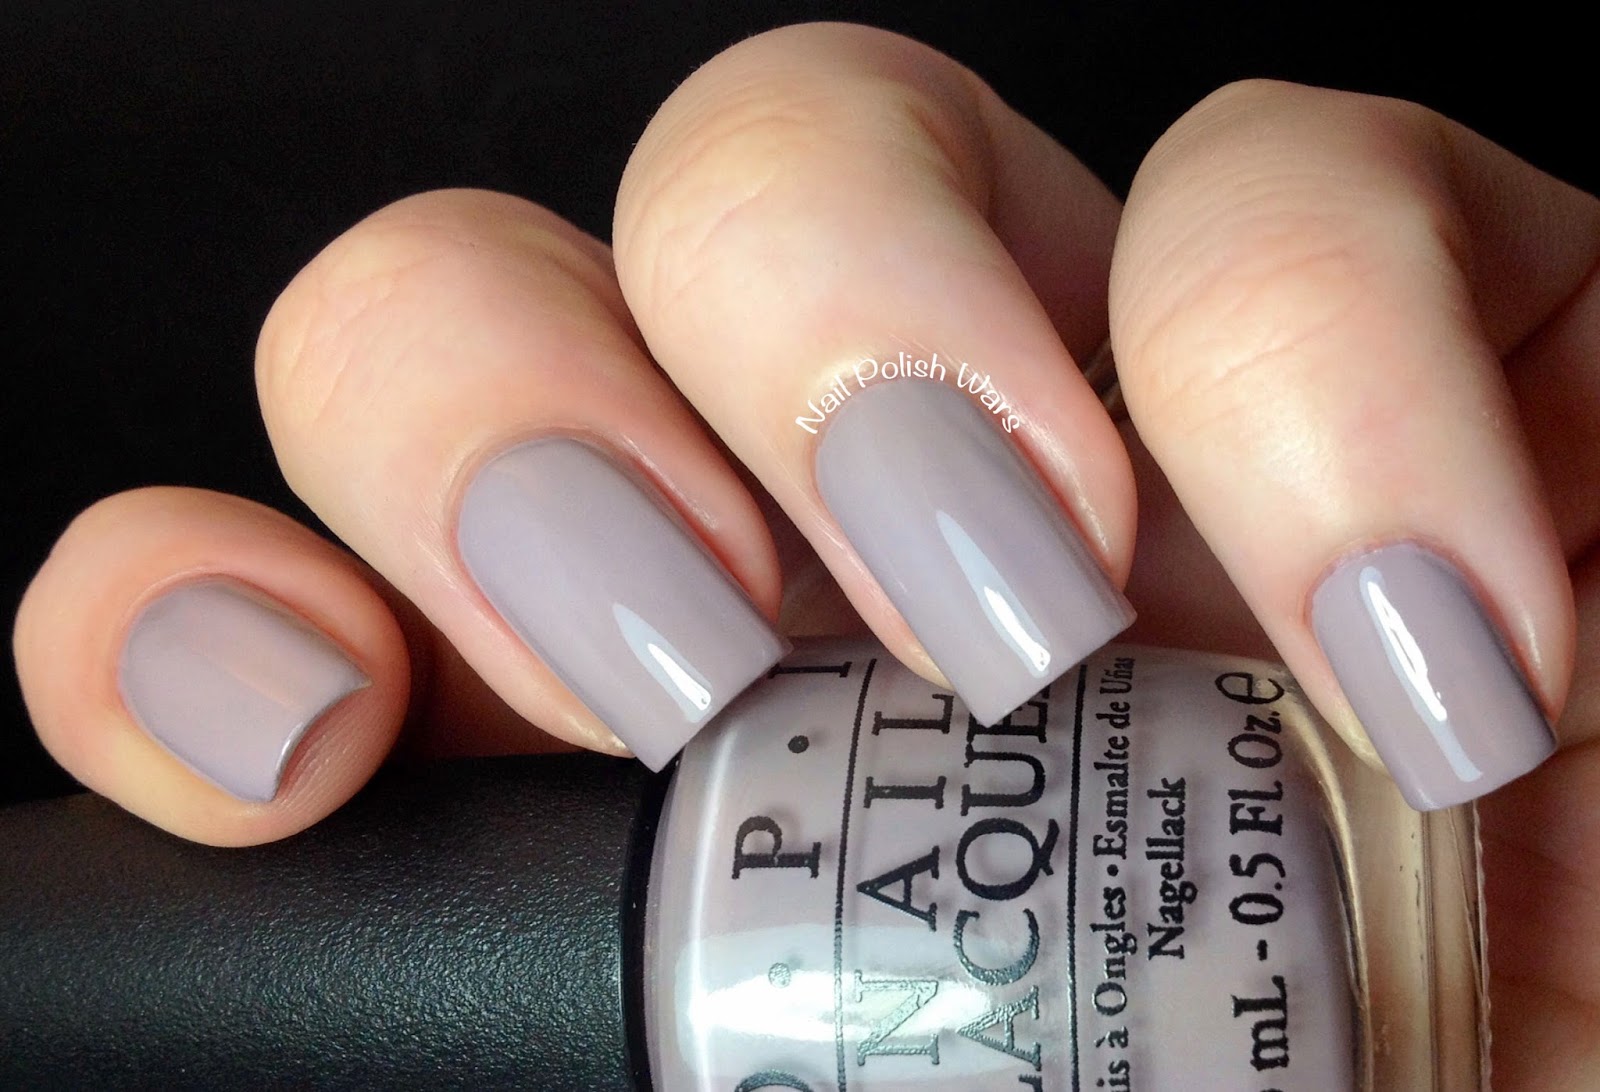 8. OPI "Taupe-less Beach" - wide 5